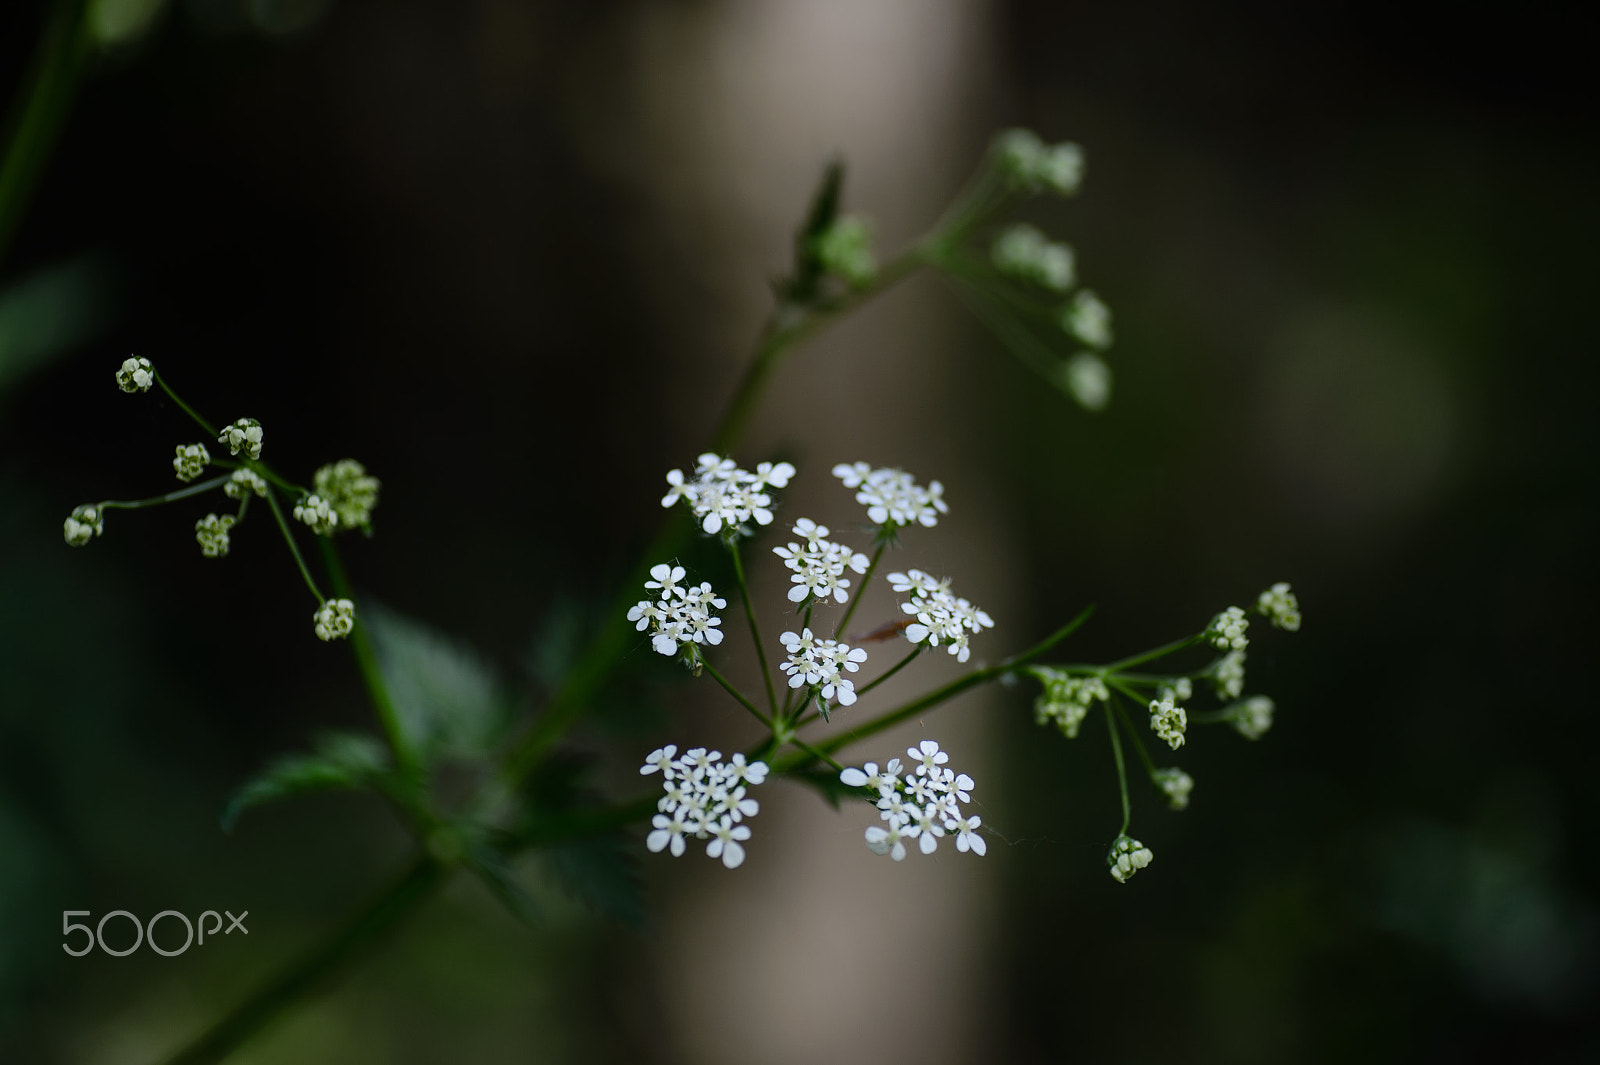 Nikon Df + Tamron SP 90mm F2.8 Di VC USD 1:1 Macro sample photo. Contrast in the forest photography